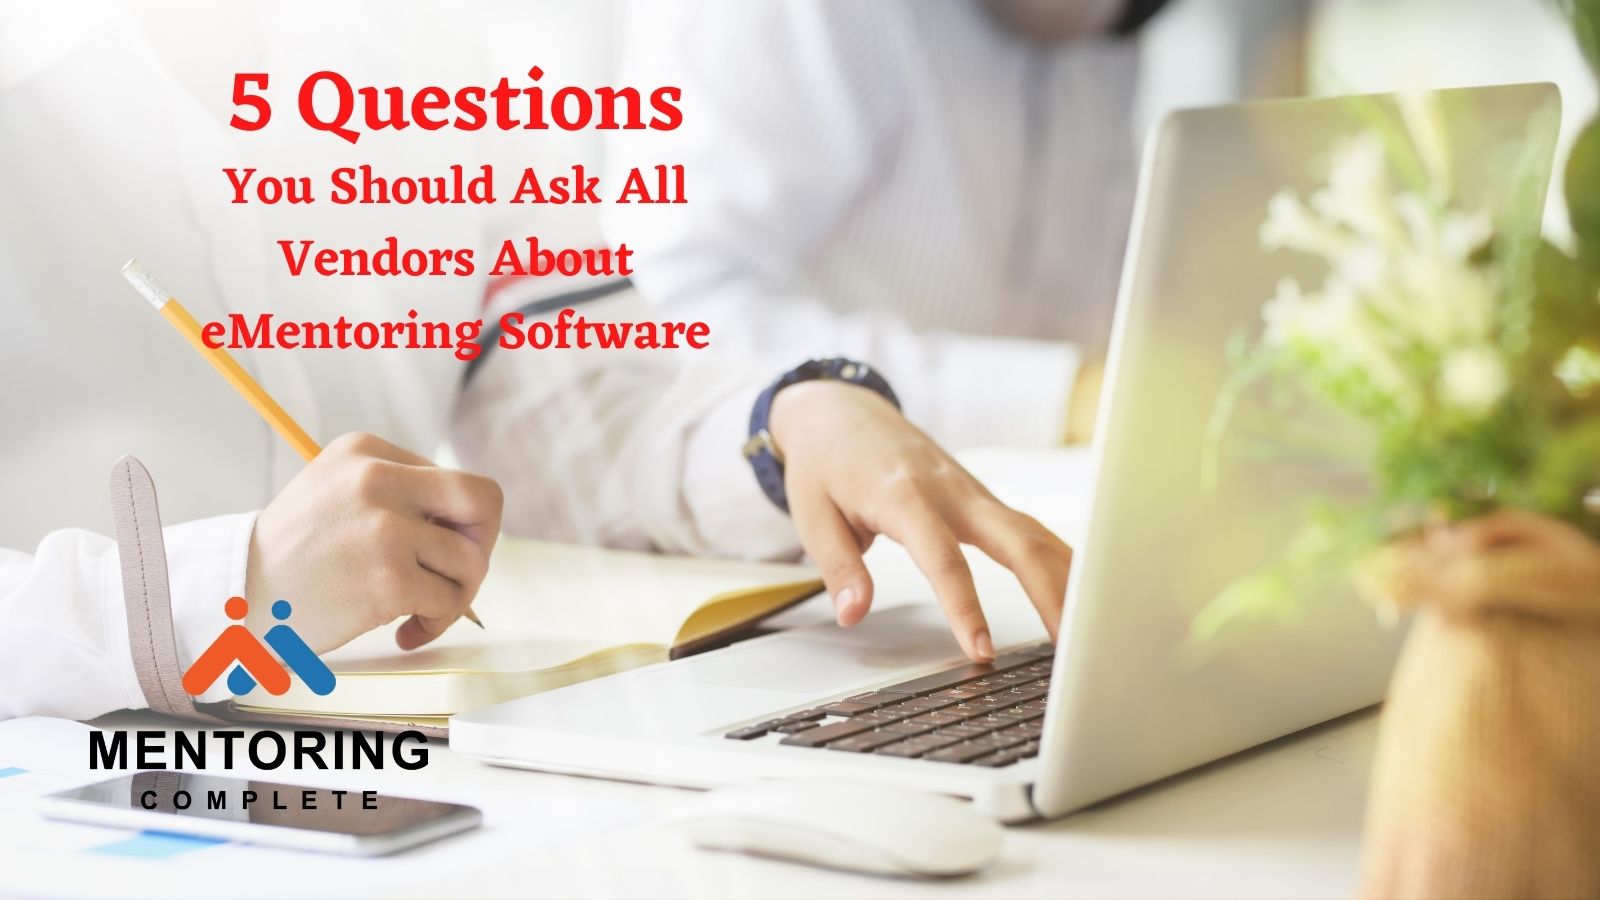 5 Questions To Ask All Vendors about Mentoring Software - Mentoring Complete